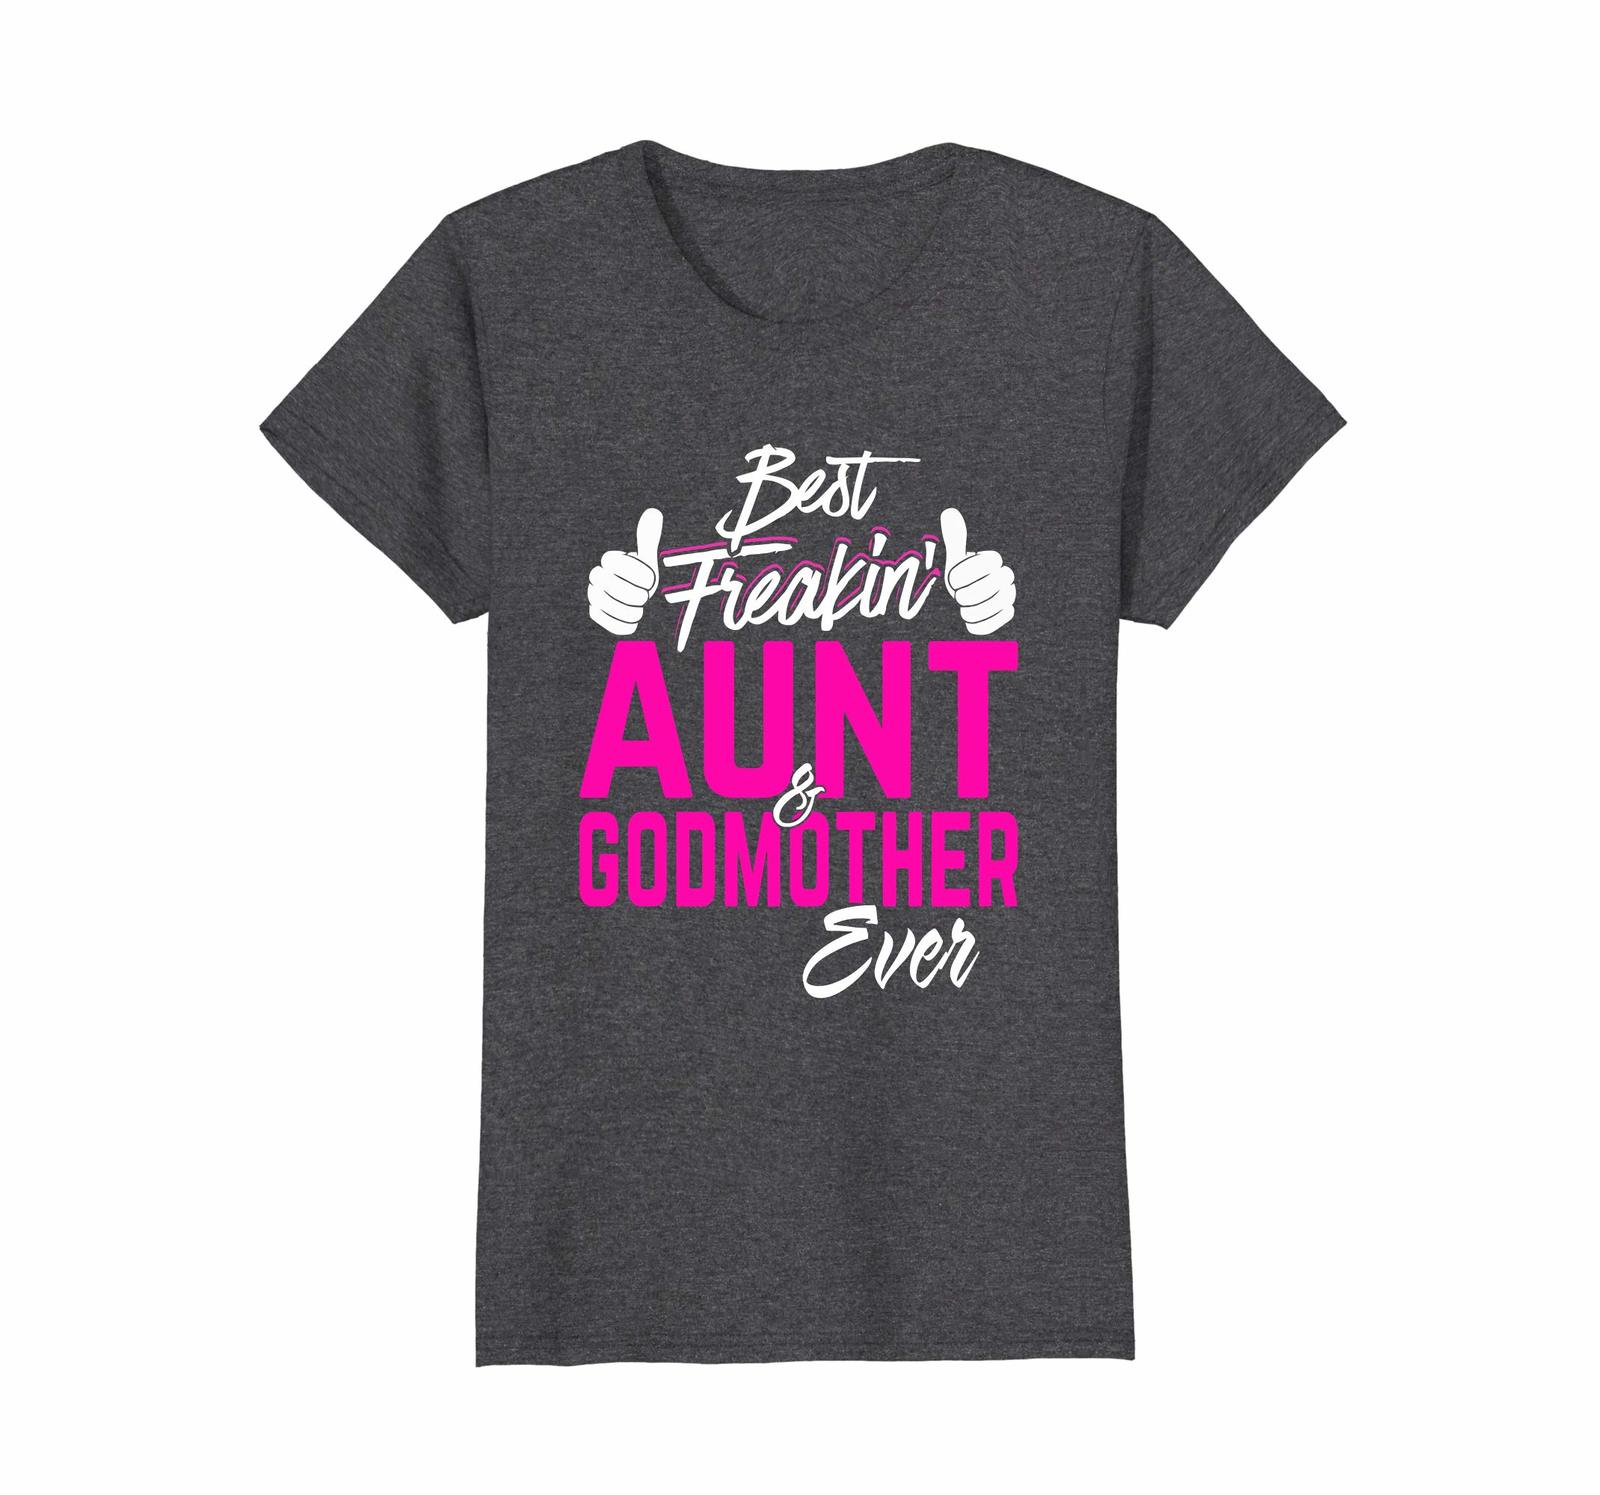 Tee Shirt -  Best Freakin Aunt And Godmother Ever Tshirt Gifts Funny Wowen